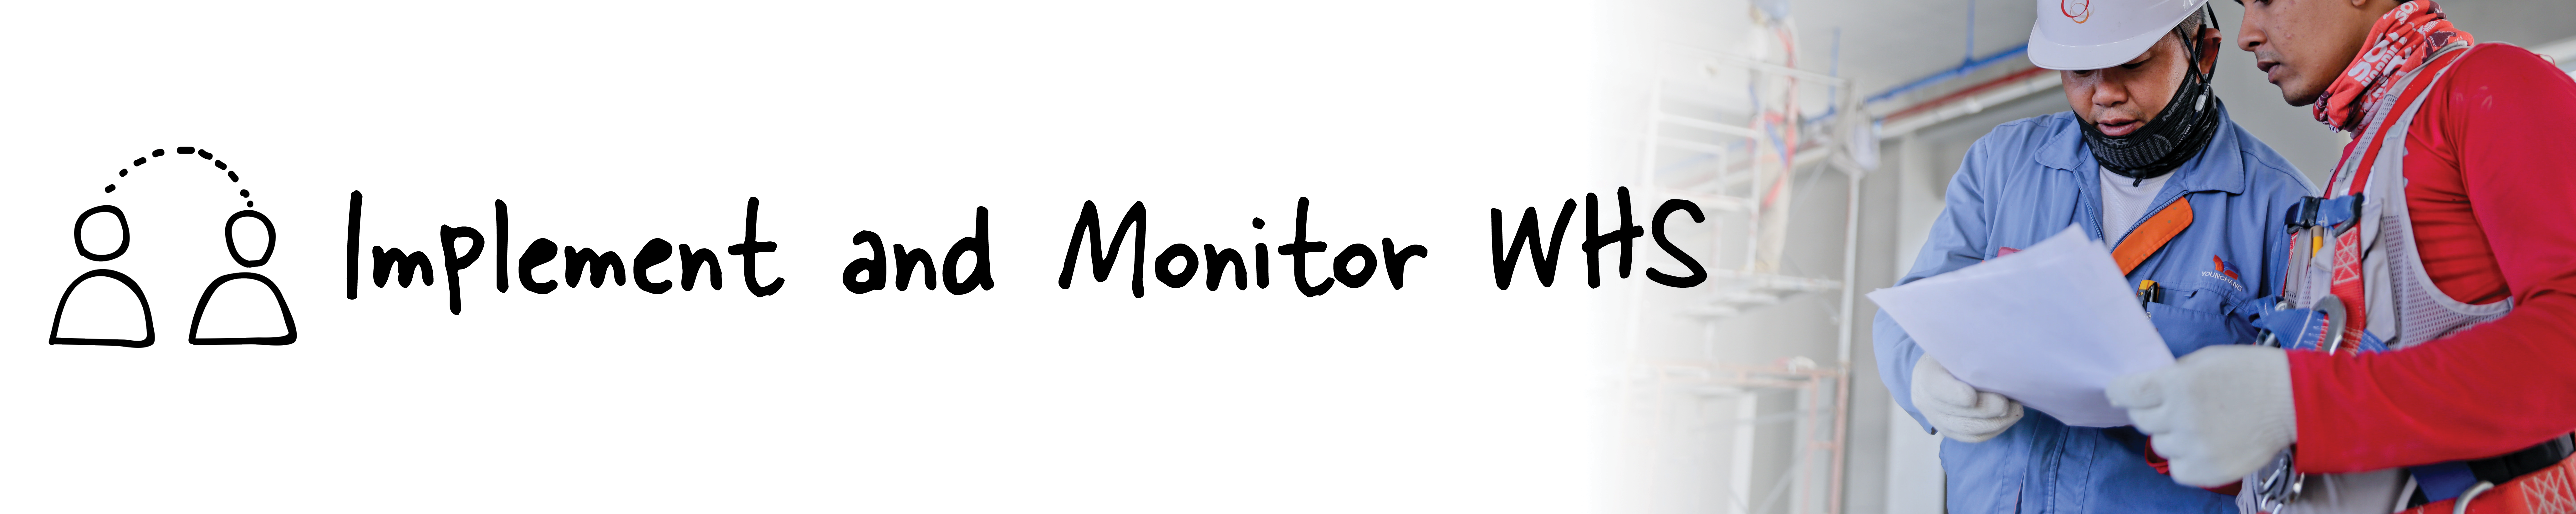 Implement and Monitor WHS